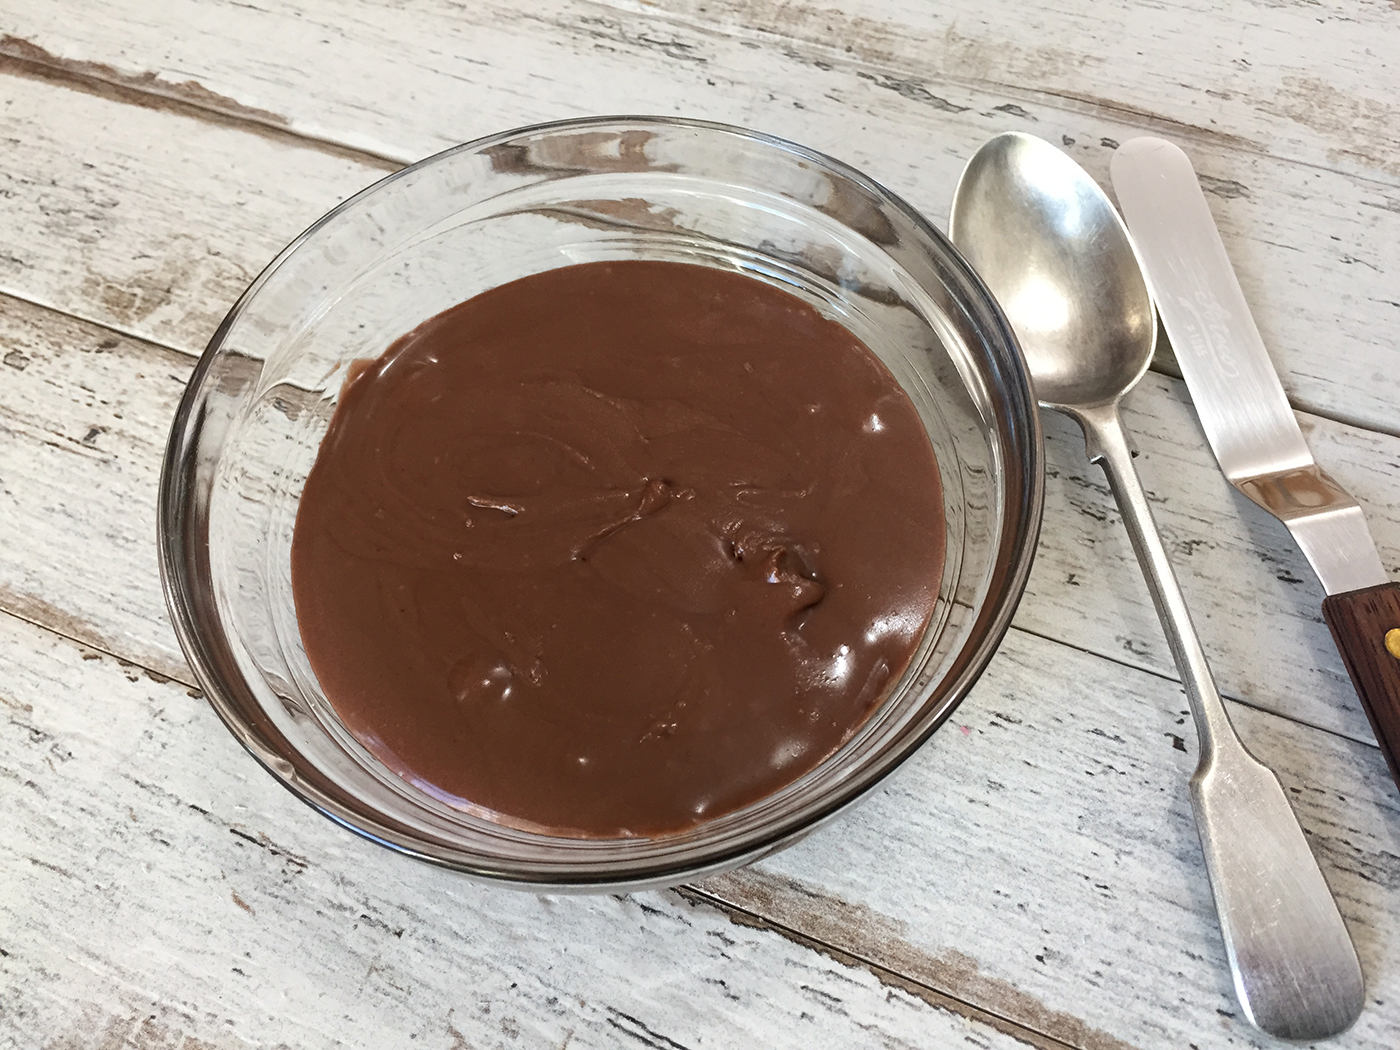 Chocolate Glacé Icing Recipe Coming Soon...